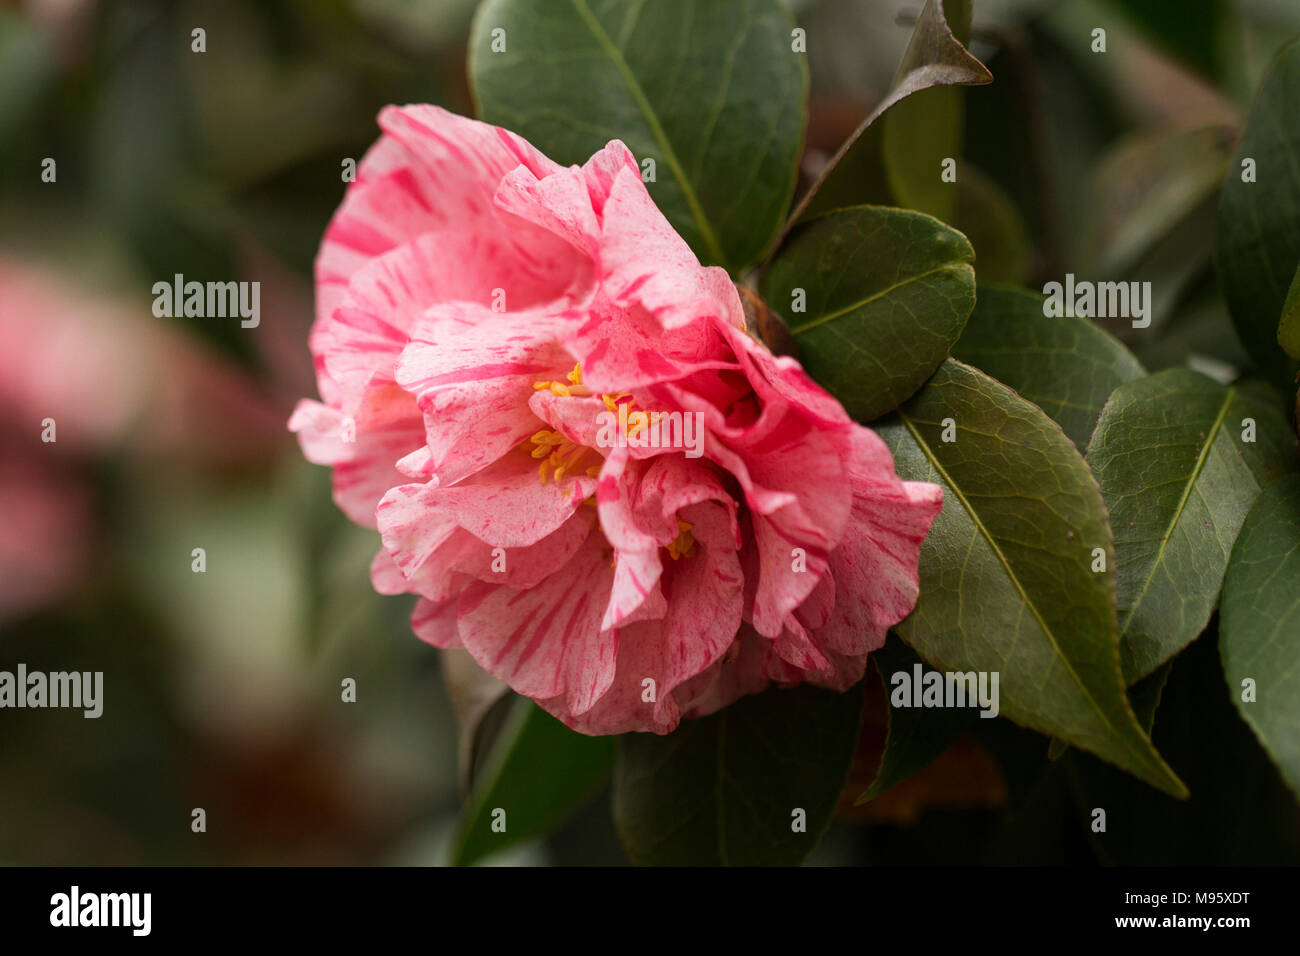 Candy striped camellia (camellia japonica) growing on a bush in Atlanta Stock Photo